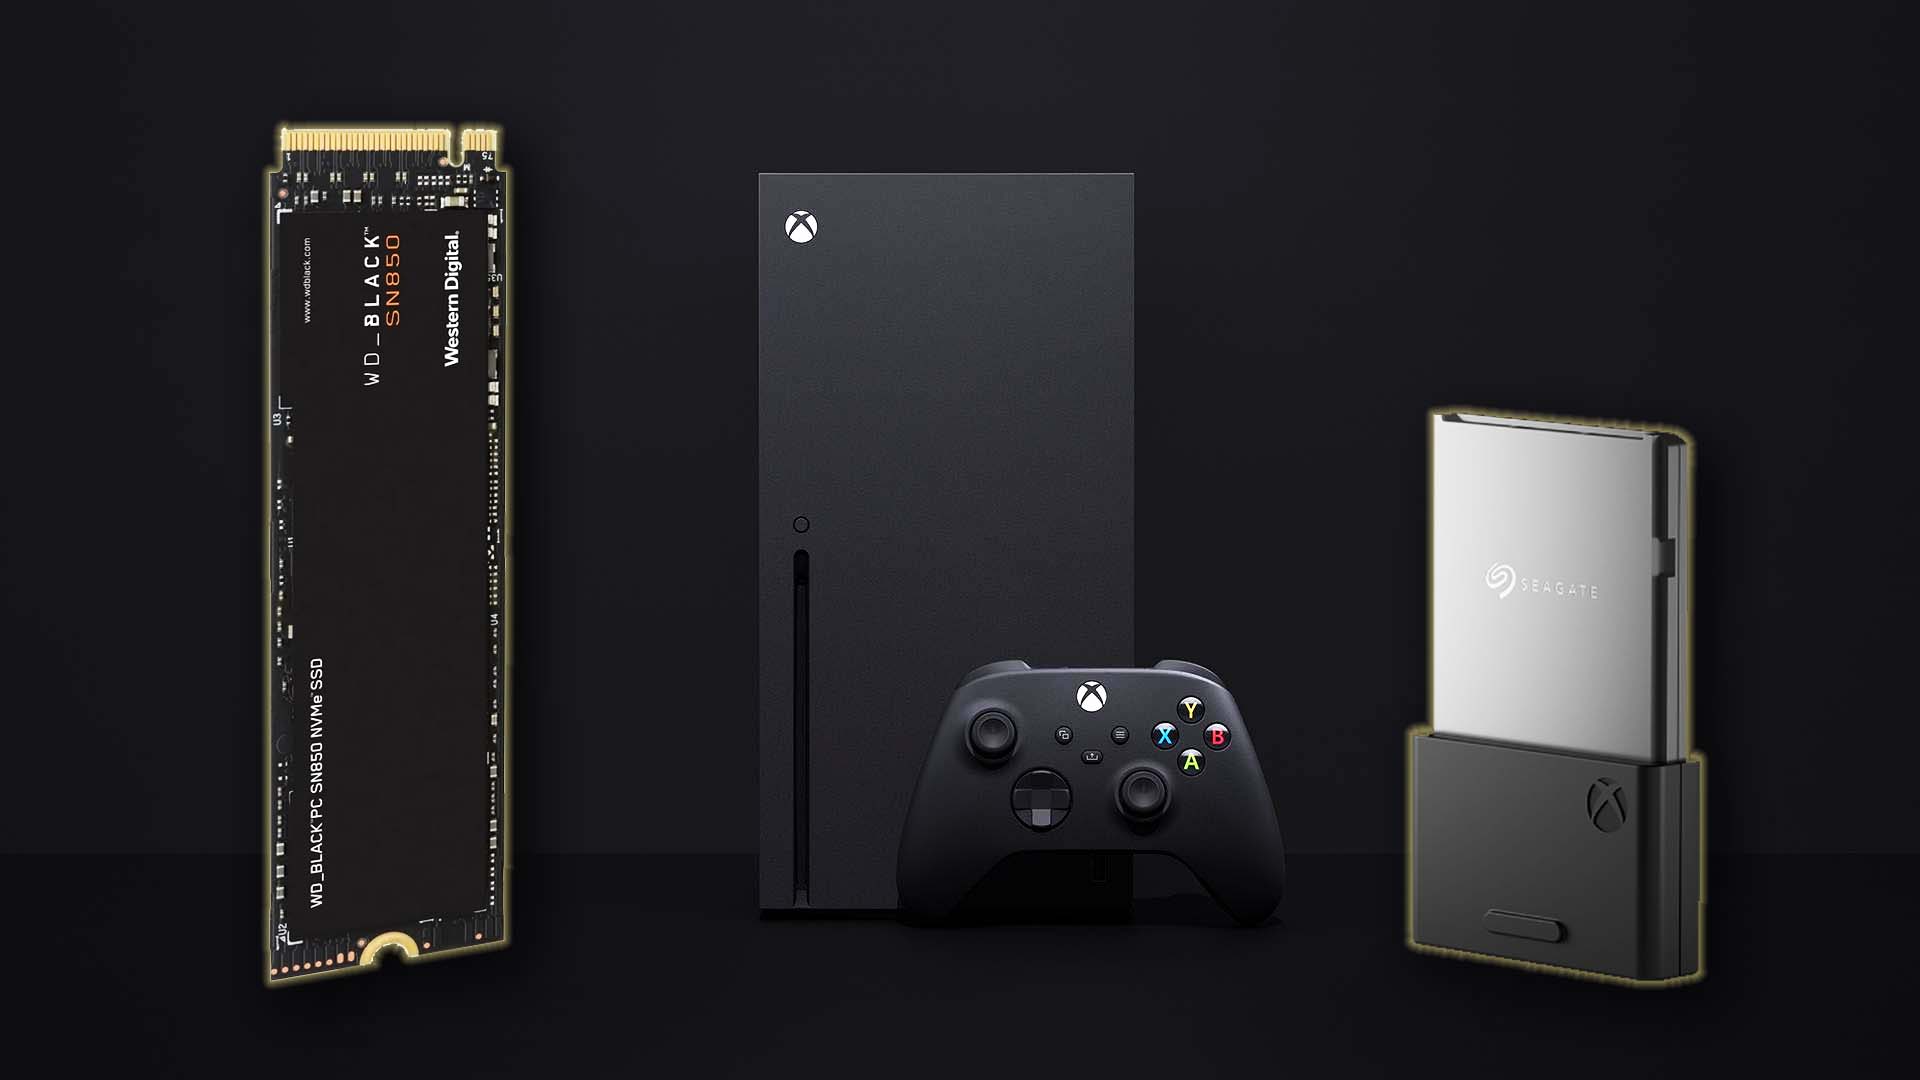 Looks like there's a simple way to expand Xbox Series X